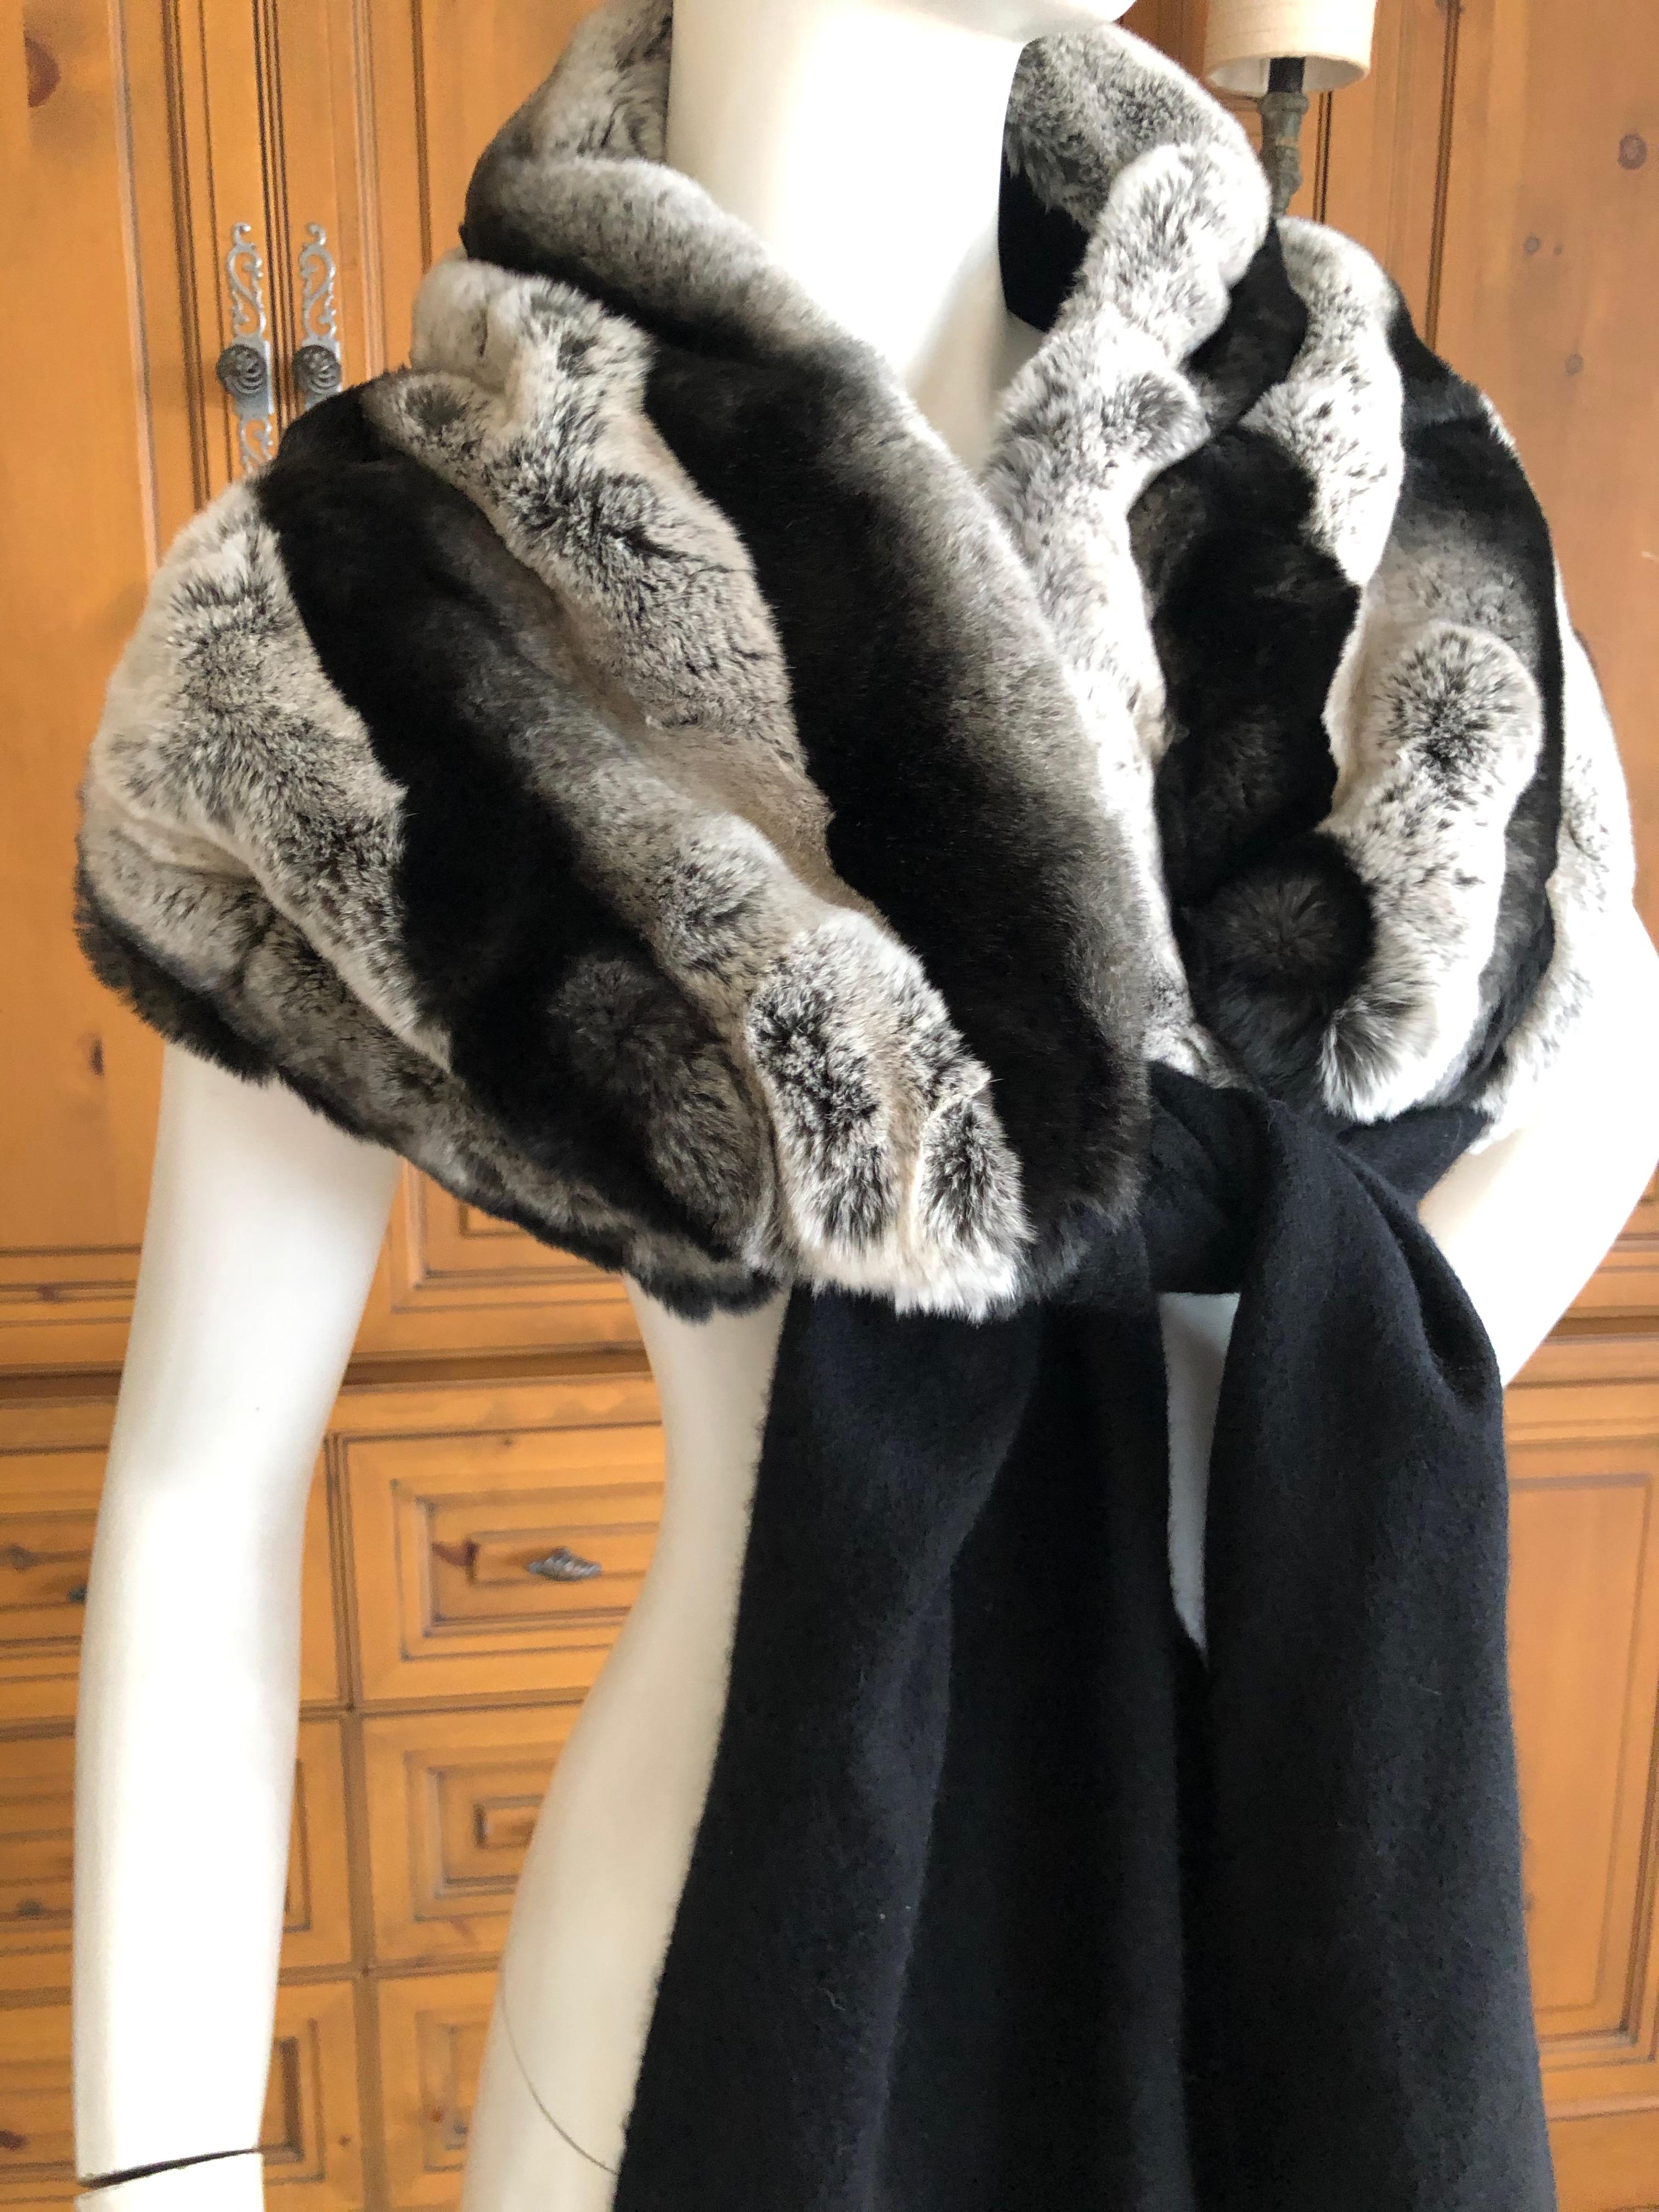 Roberto Cavalli Vintage Pure Cashmere Chinchilla Rex Trimmed Scarf from Class Cavalli.
Chinchilla rex is a type of rabbit that replicates the color and feel of chinchilla.
Length 80